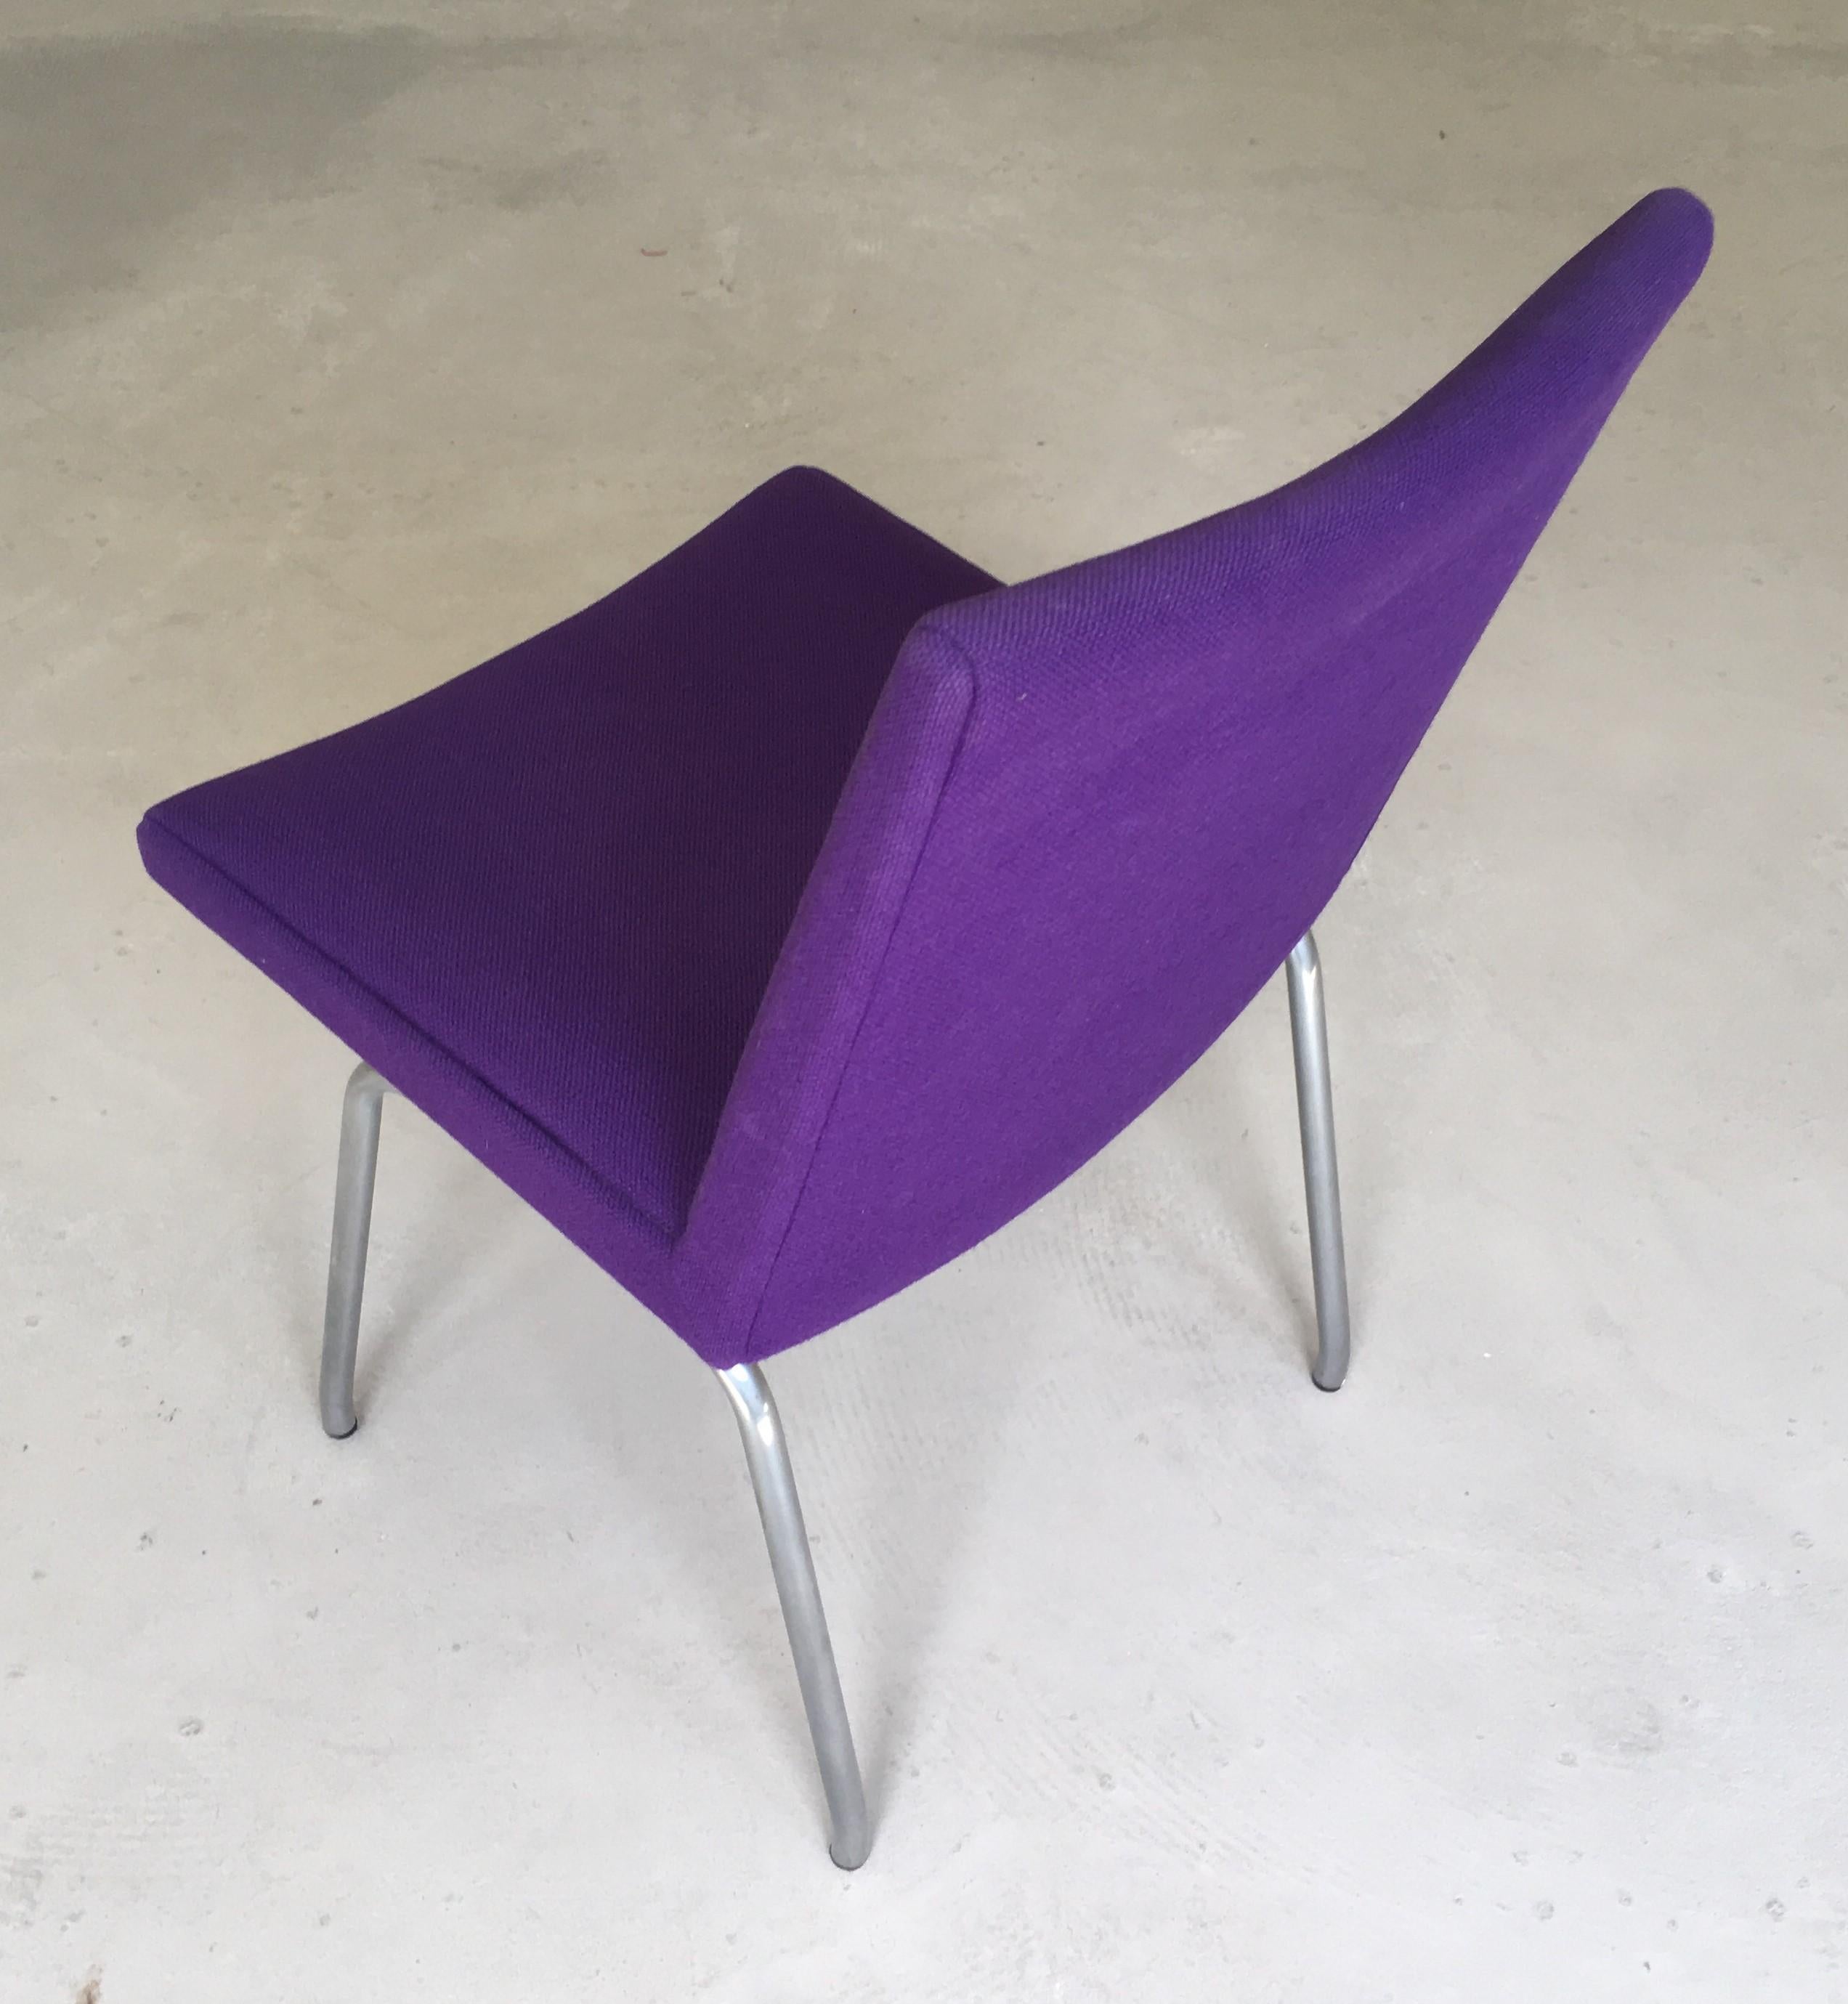 Mid-20th Century 1960s Danish Hans J. Wegner Airport Chair, Reupholstered in Purple Fabric For Sale